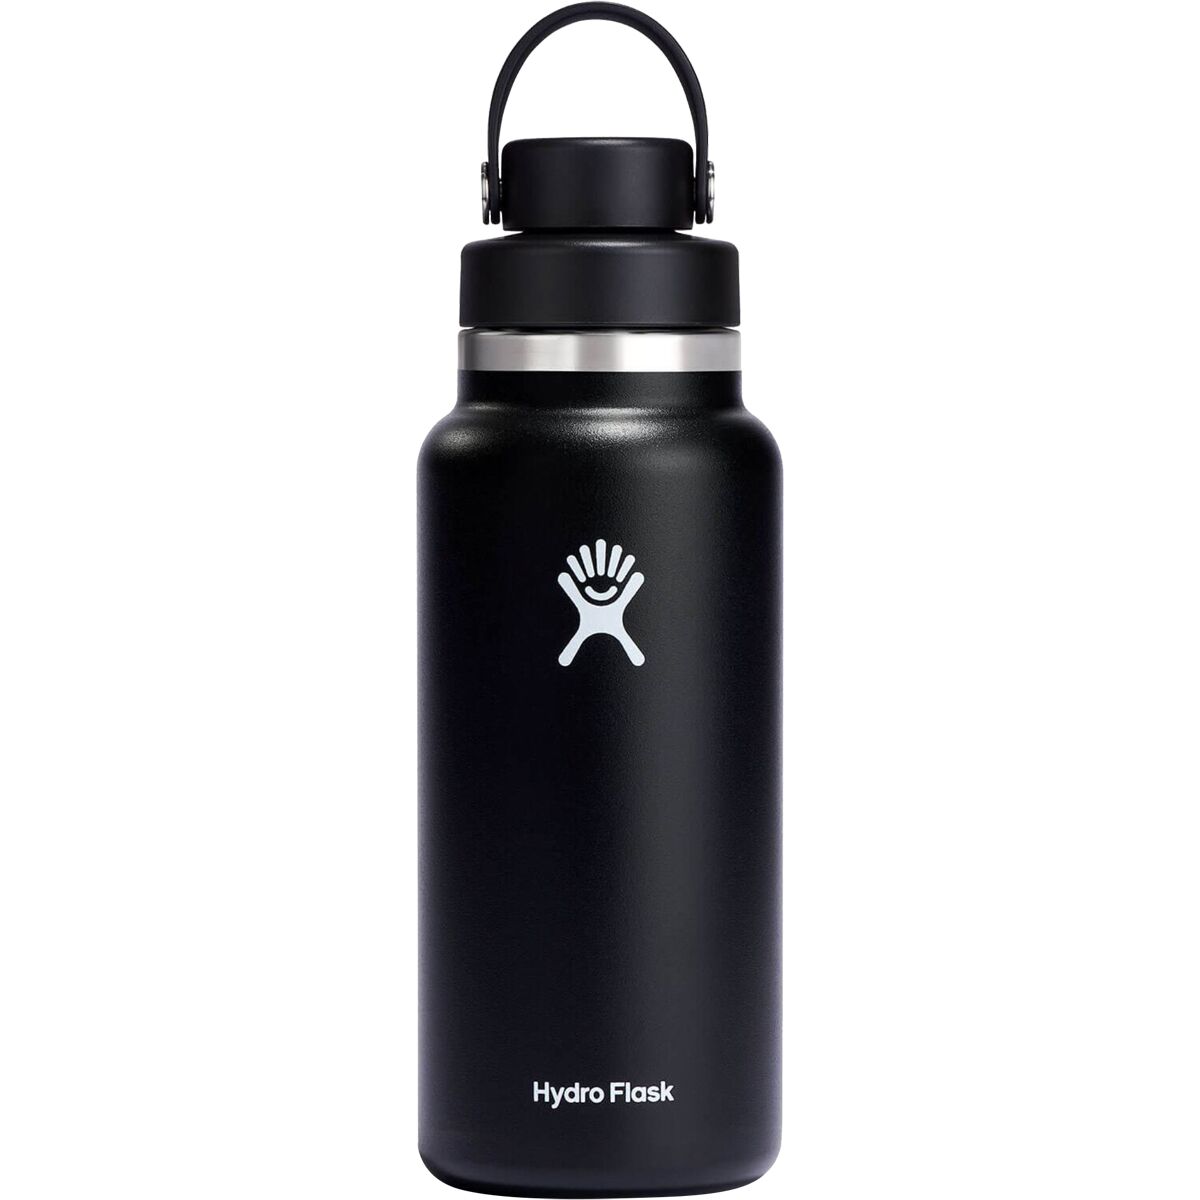 Hydro Flask 32oz Wide Mouth Water Bottle + Chug Cap